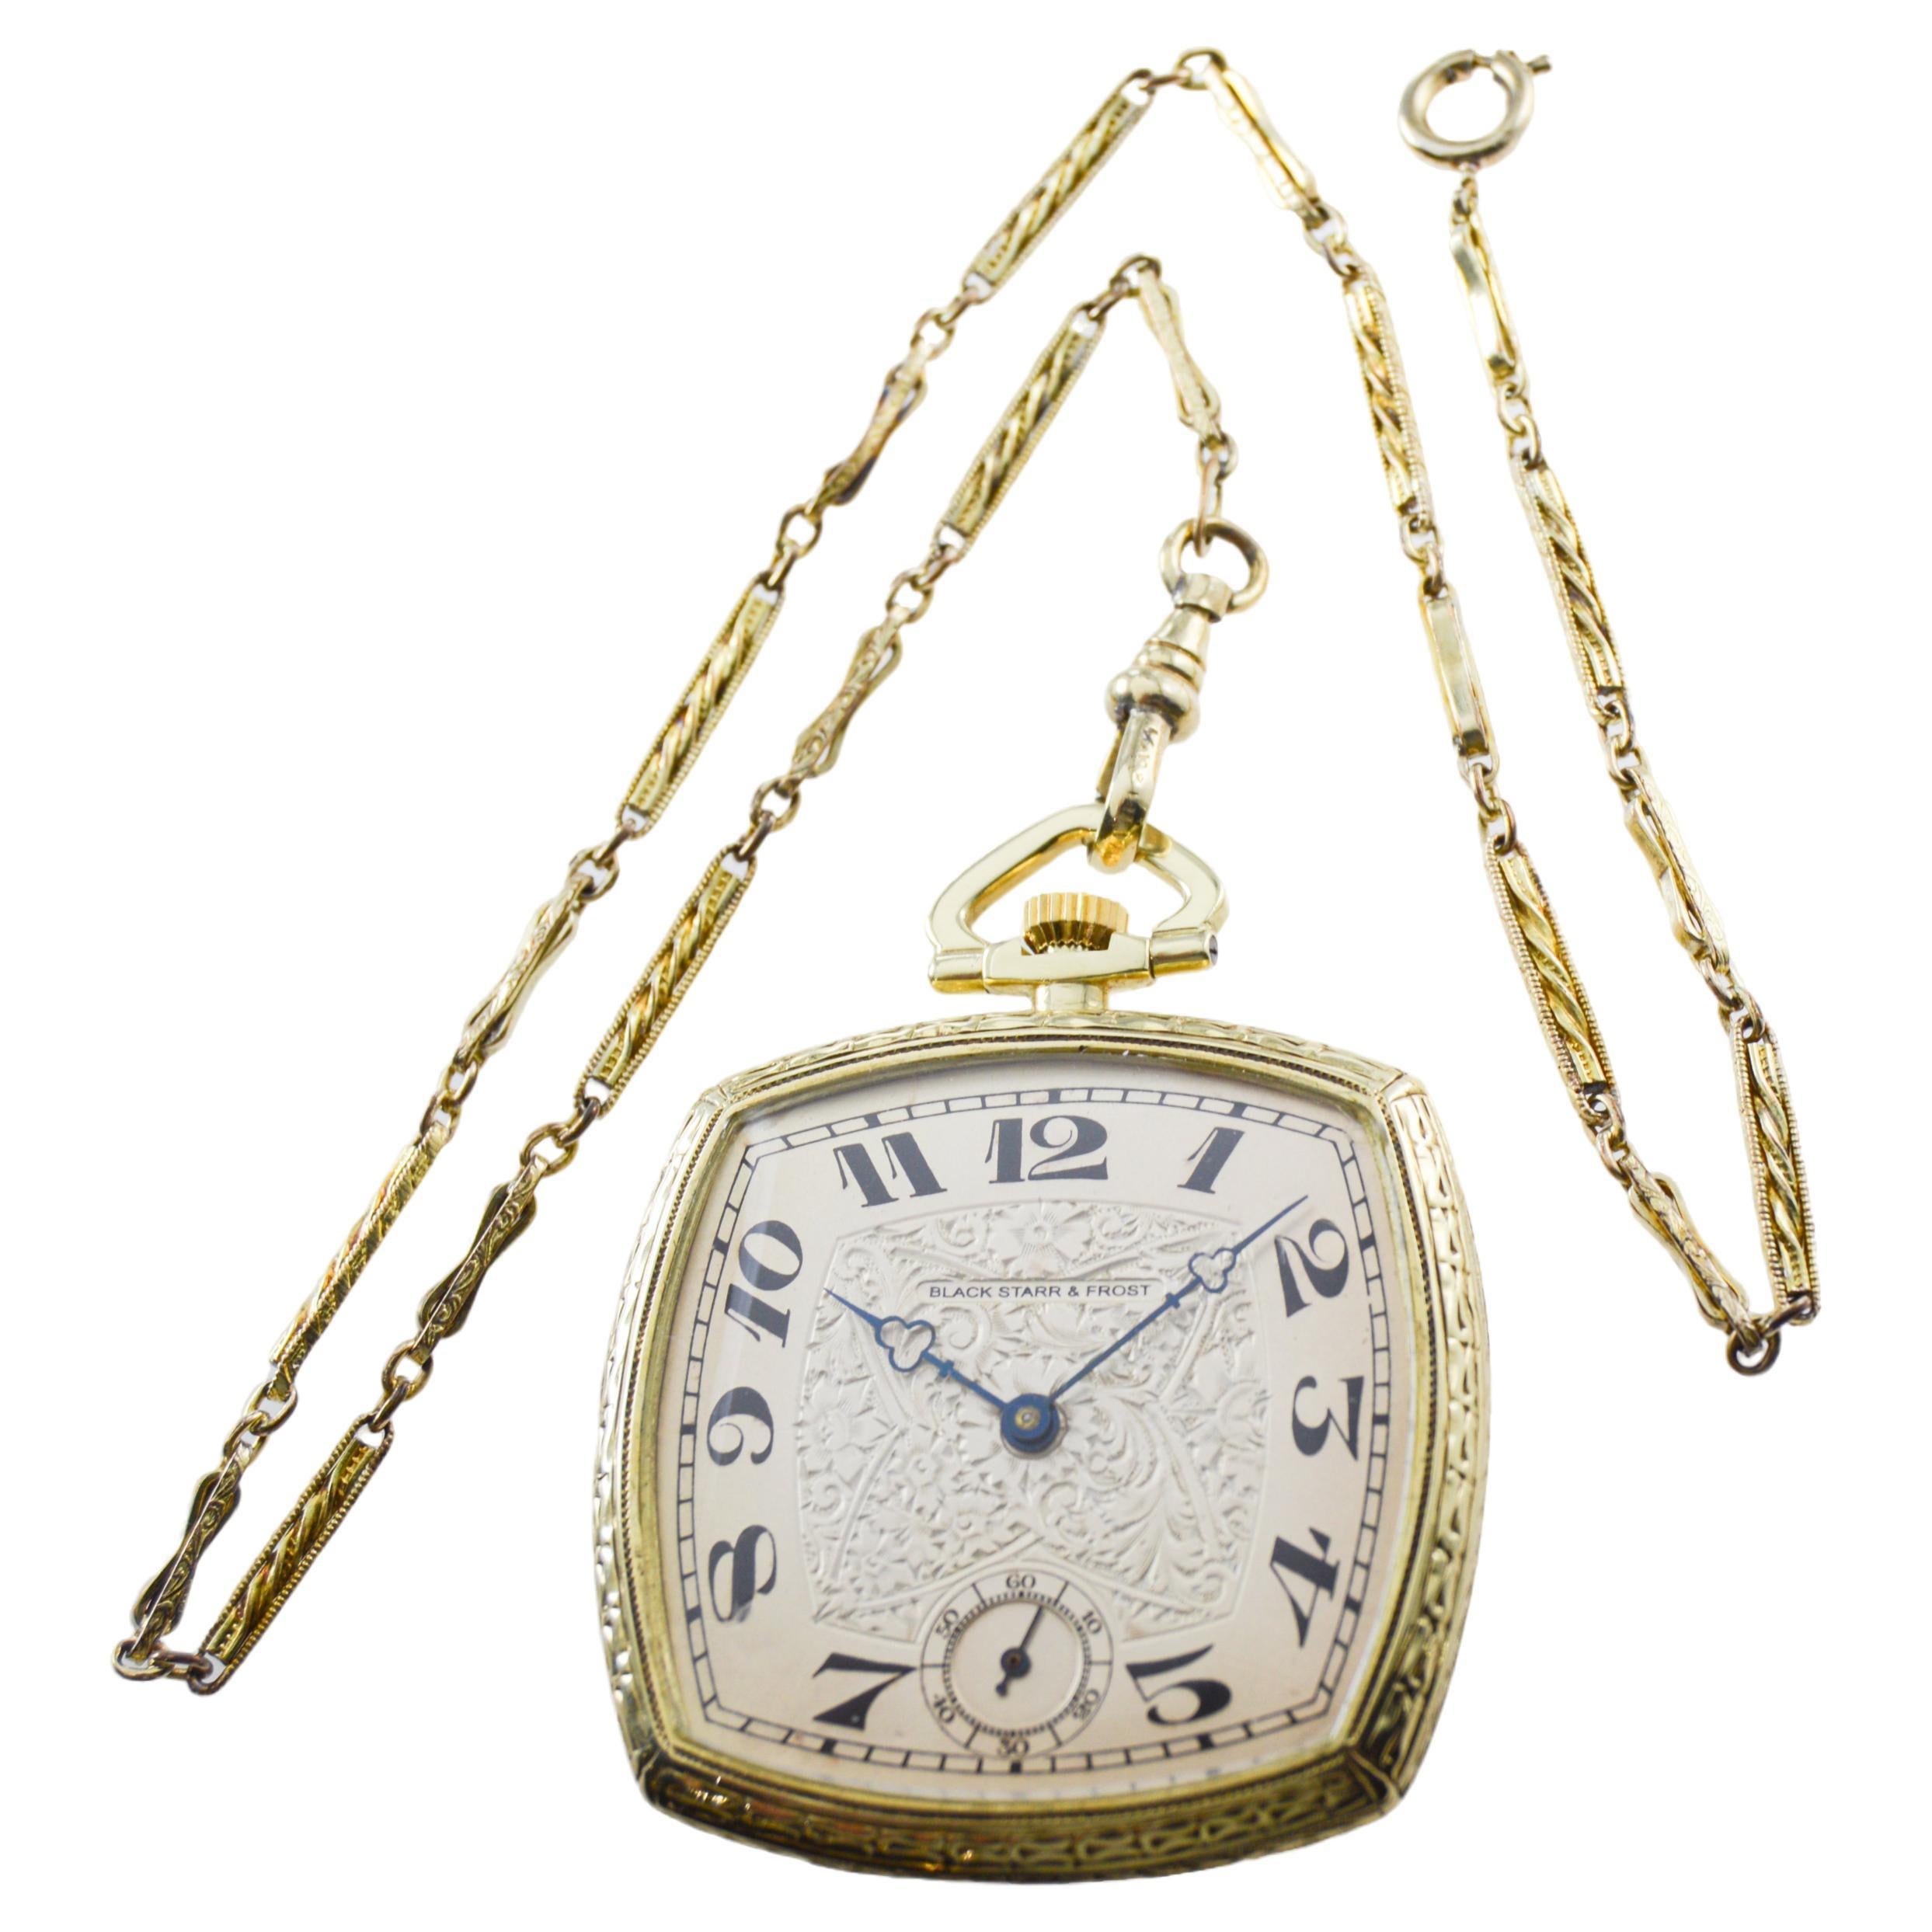 Women's or Men's Black Starr & Frost 14 Karat Gold Art Deco Pocket Watch with Engraved Dial  For Sale